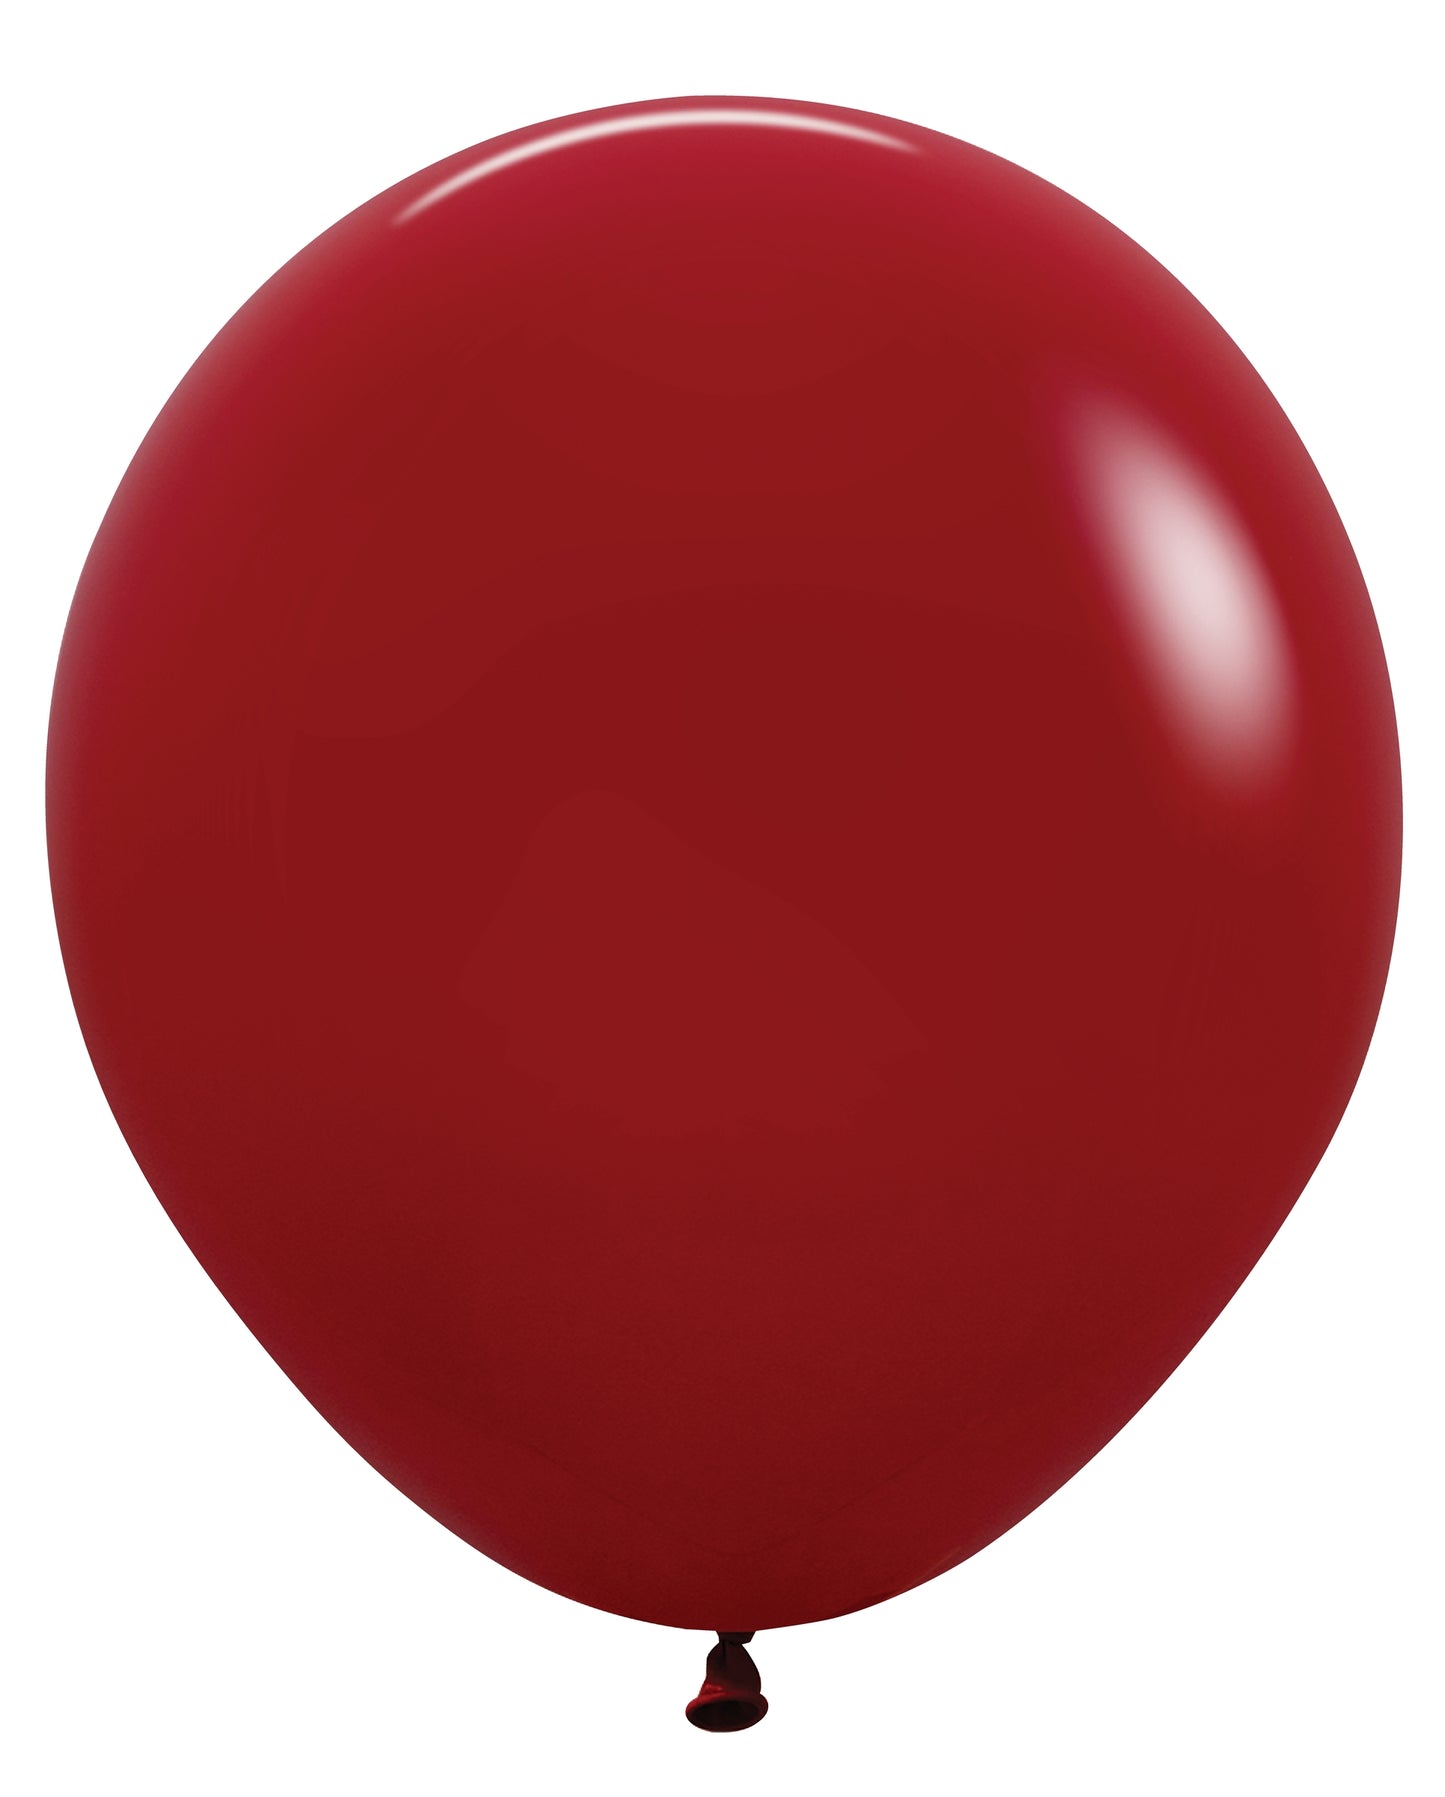 Sempertex Deluxe Imperial Red Round 18" Latex Balloon